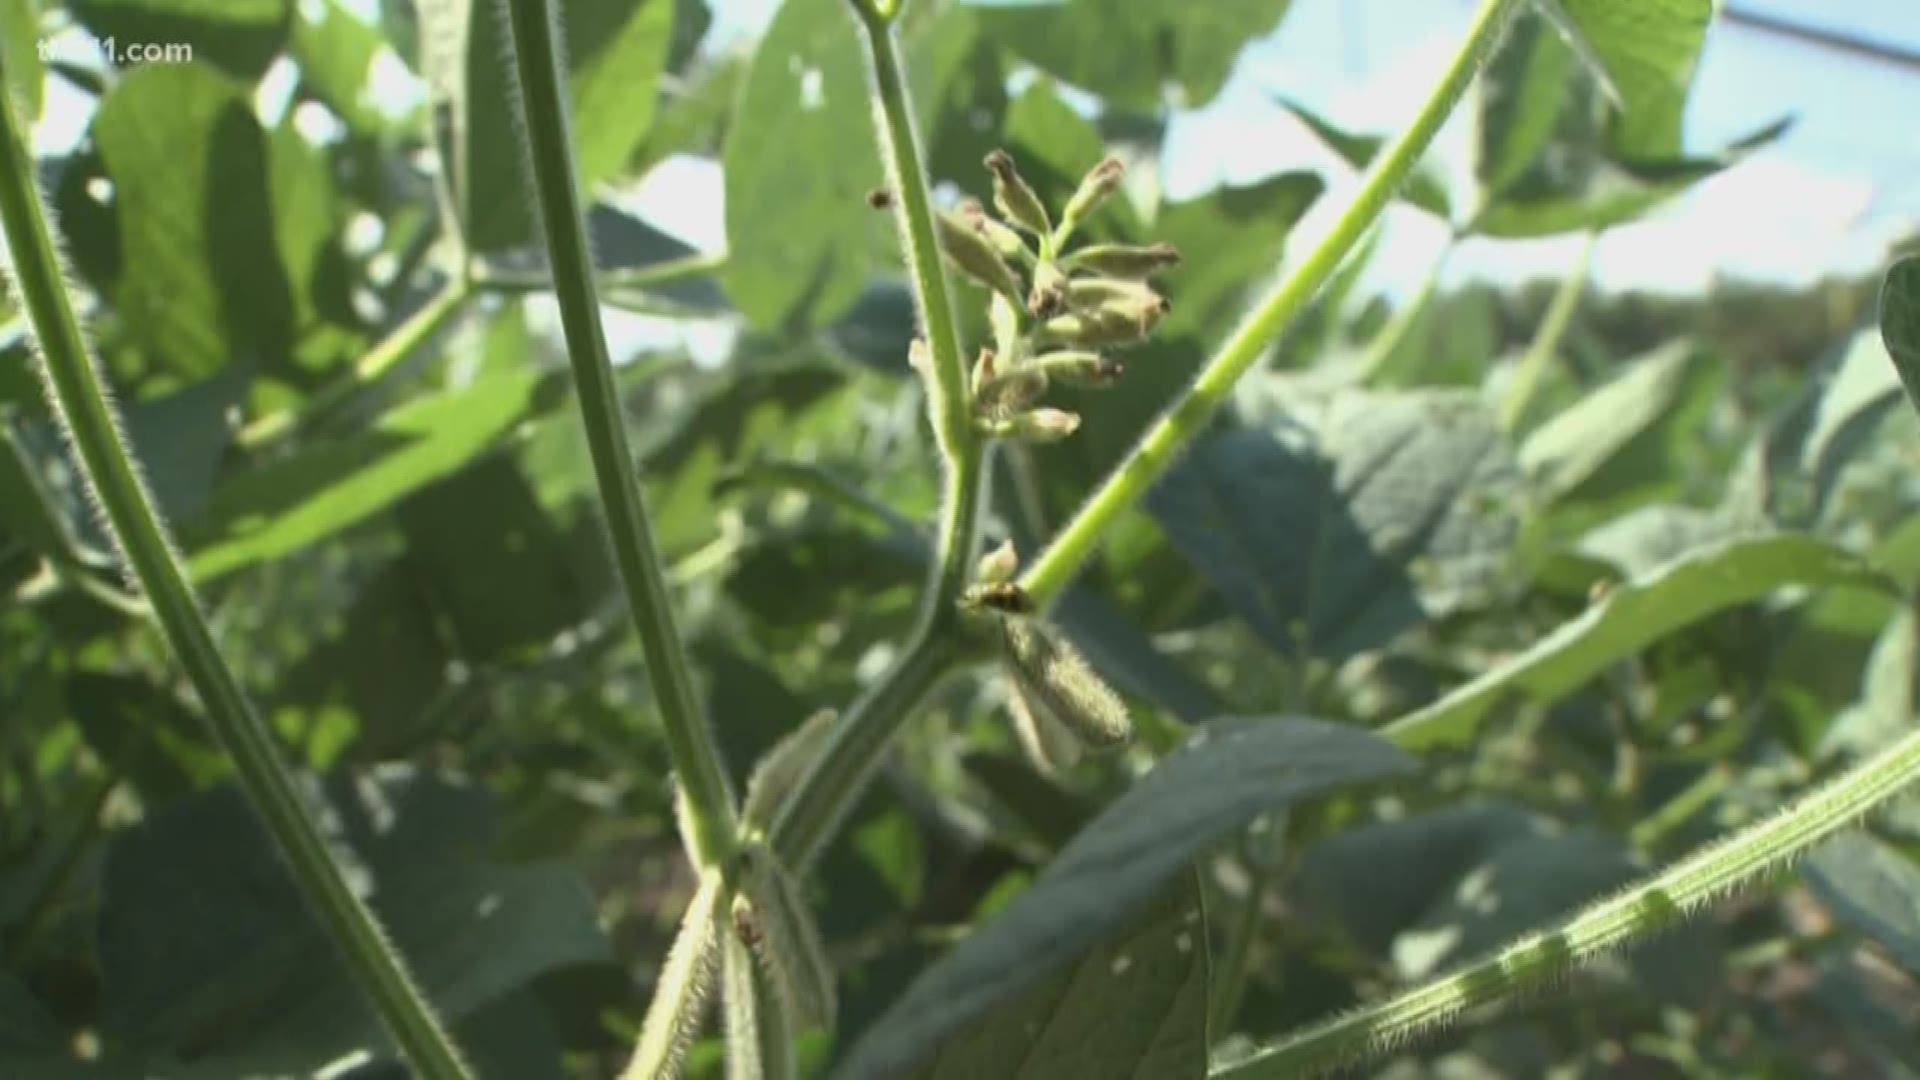 It's almost harvest time here and the Arkansas soybeans have seen it all this season. A good year versus a bad year can make or break soybean farmers.